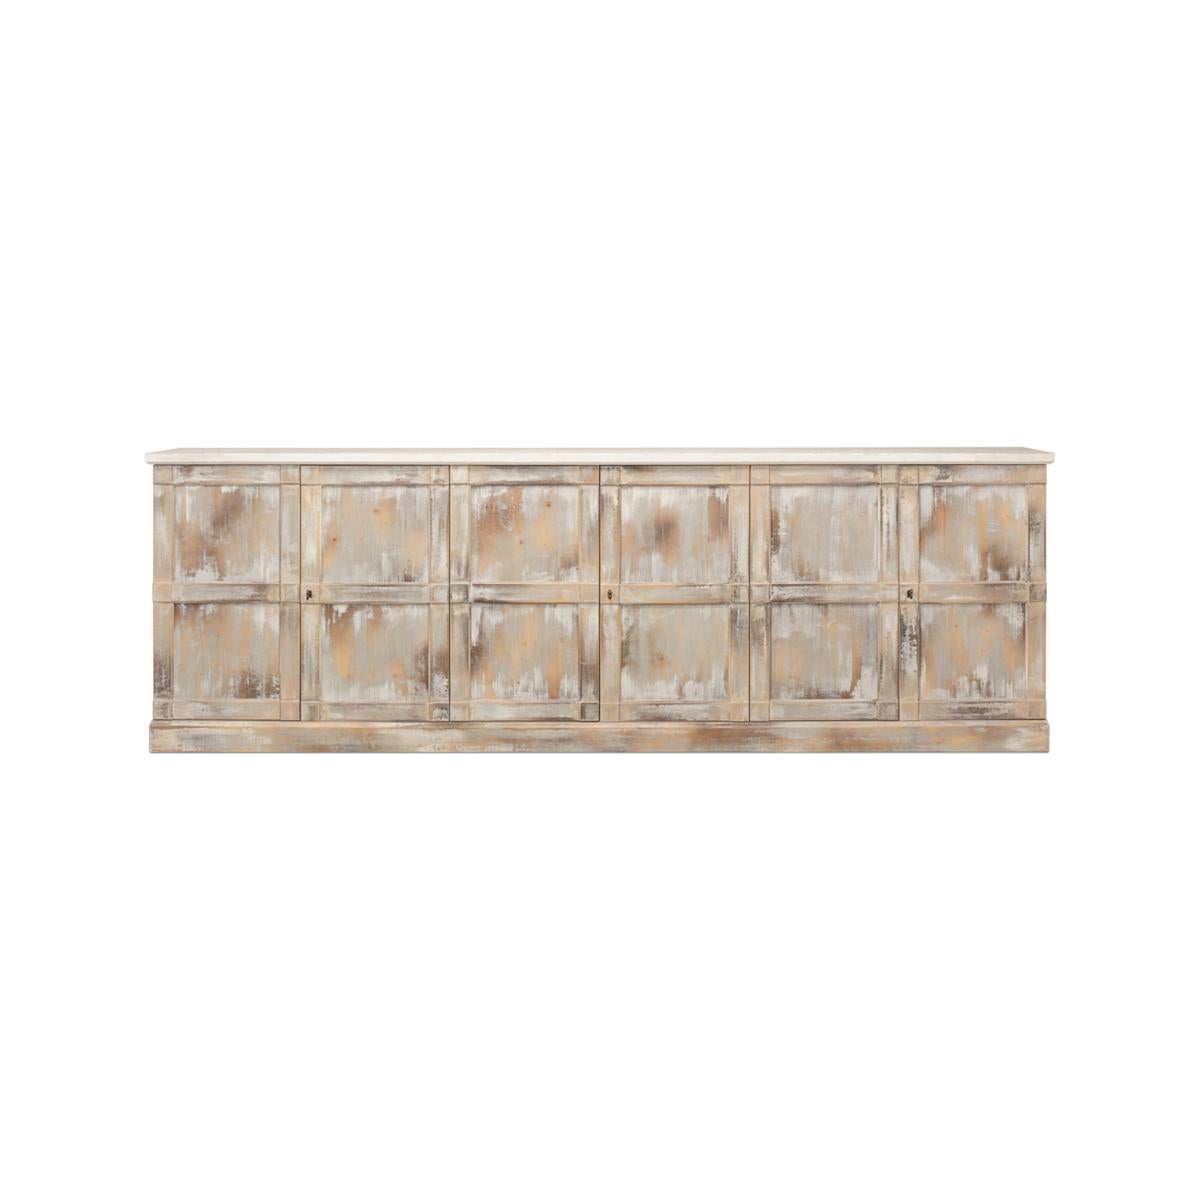 Made of pine finished in a weathered and washed gray finish that is antiqued and distressed with an off-white stucco color painted top. With six doors, a rectangular form and a perfect depth of 15